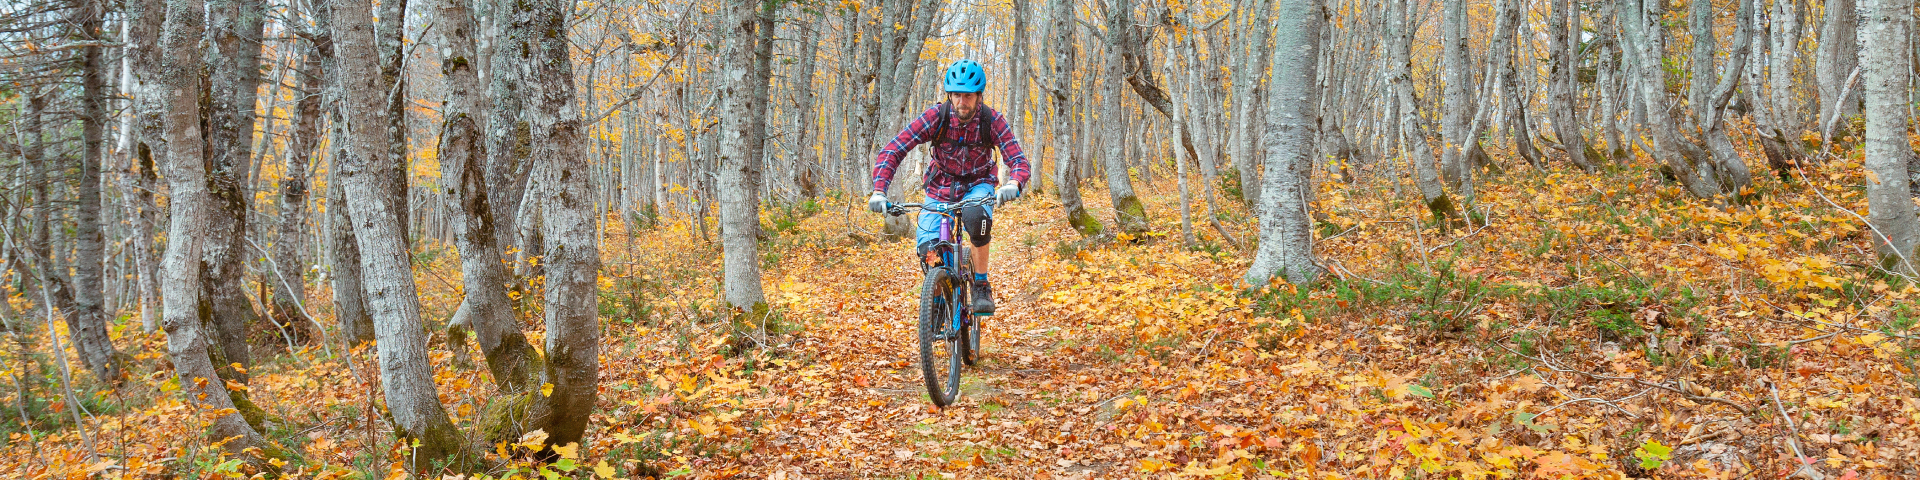 A visitor rides a mountain bike in the fall on a trail.